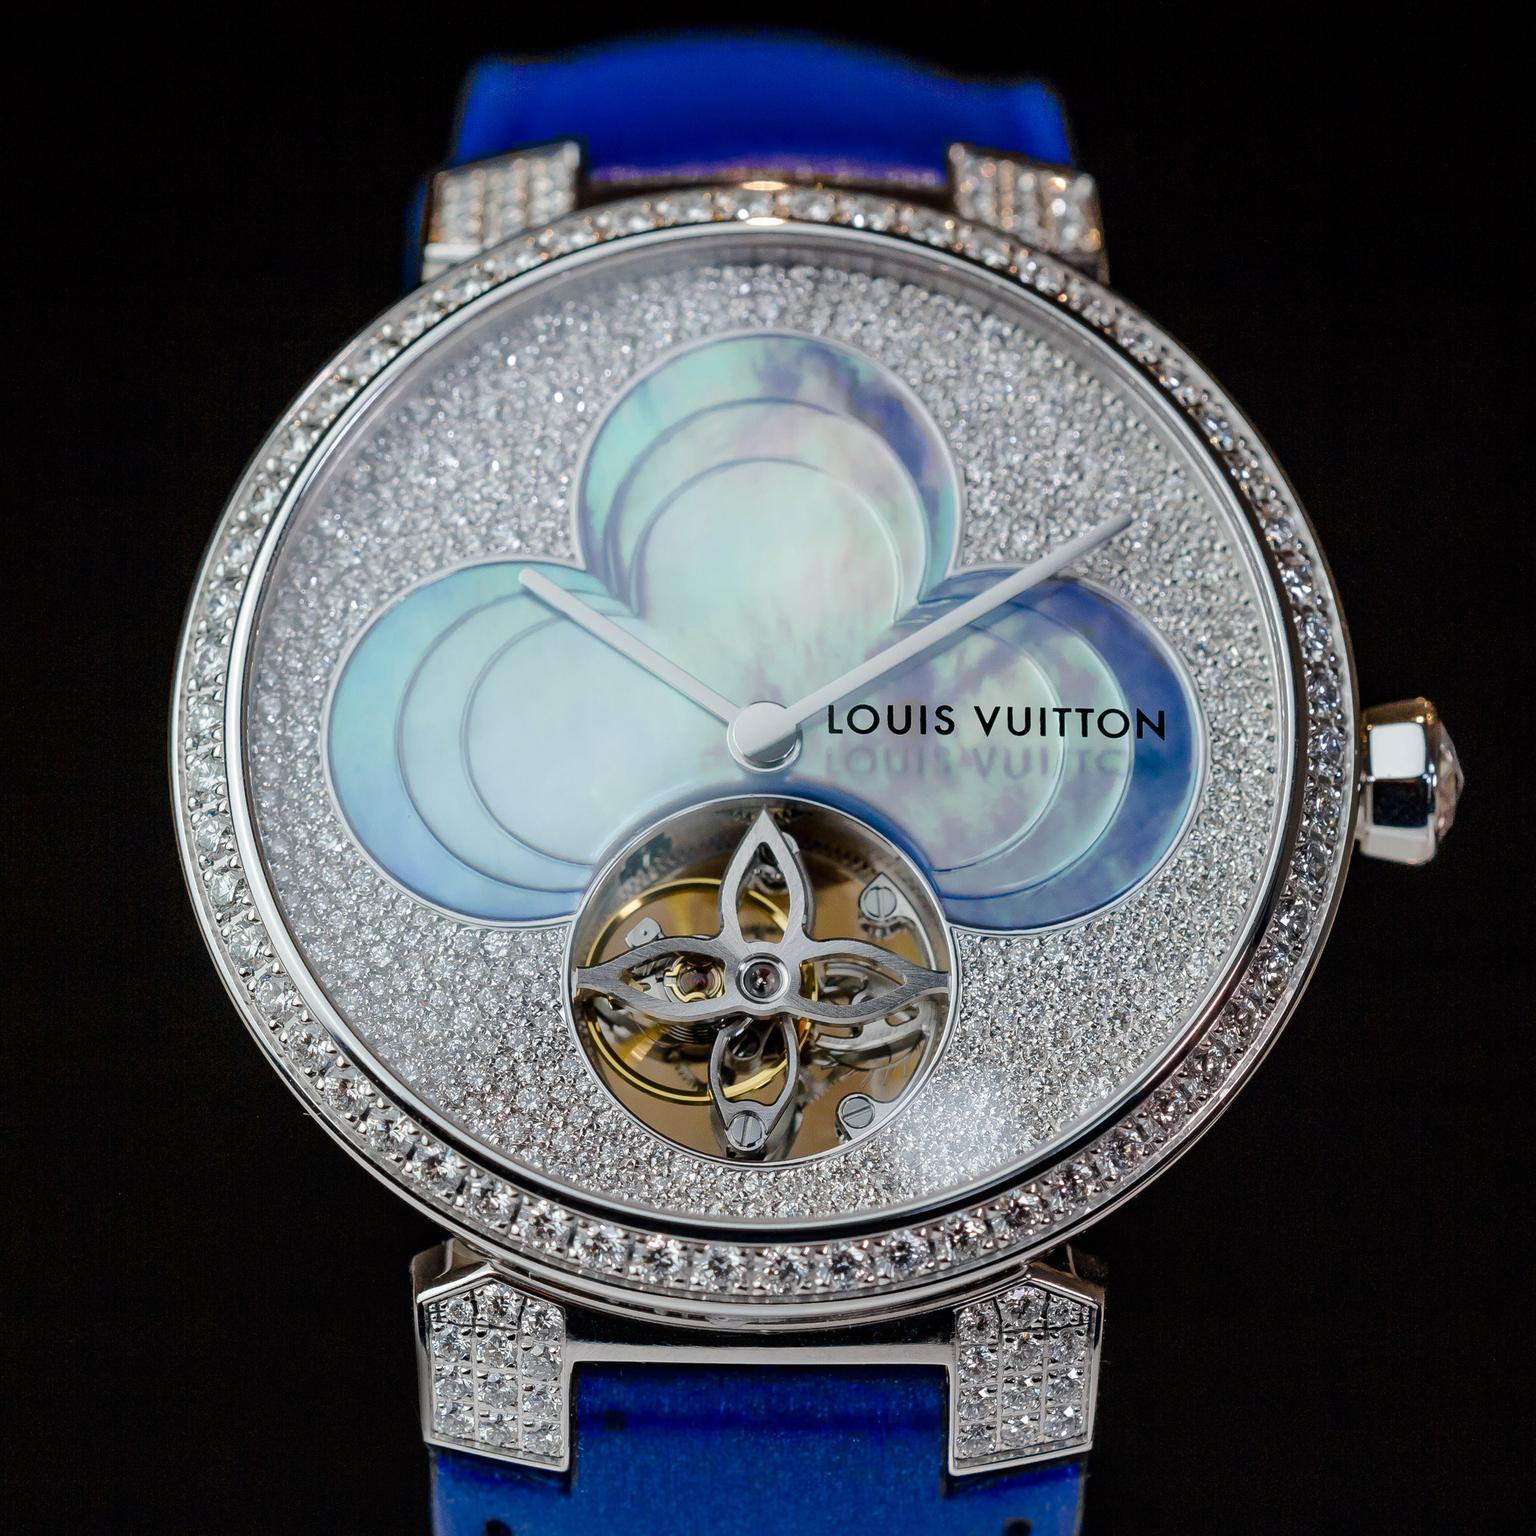 Louis Vuitton Tambour Slim Blossom Reference Q1H23, A Rose Gold